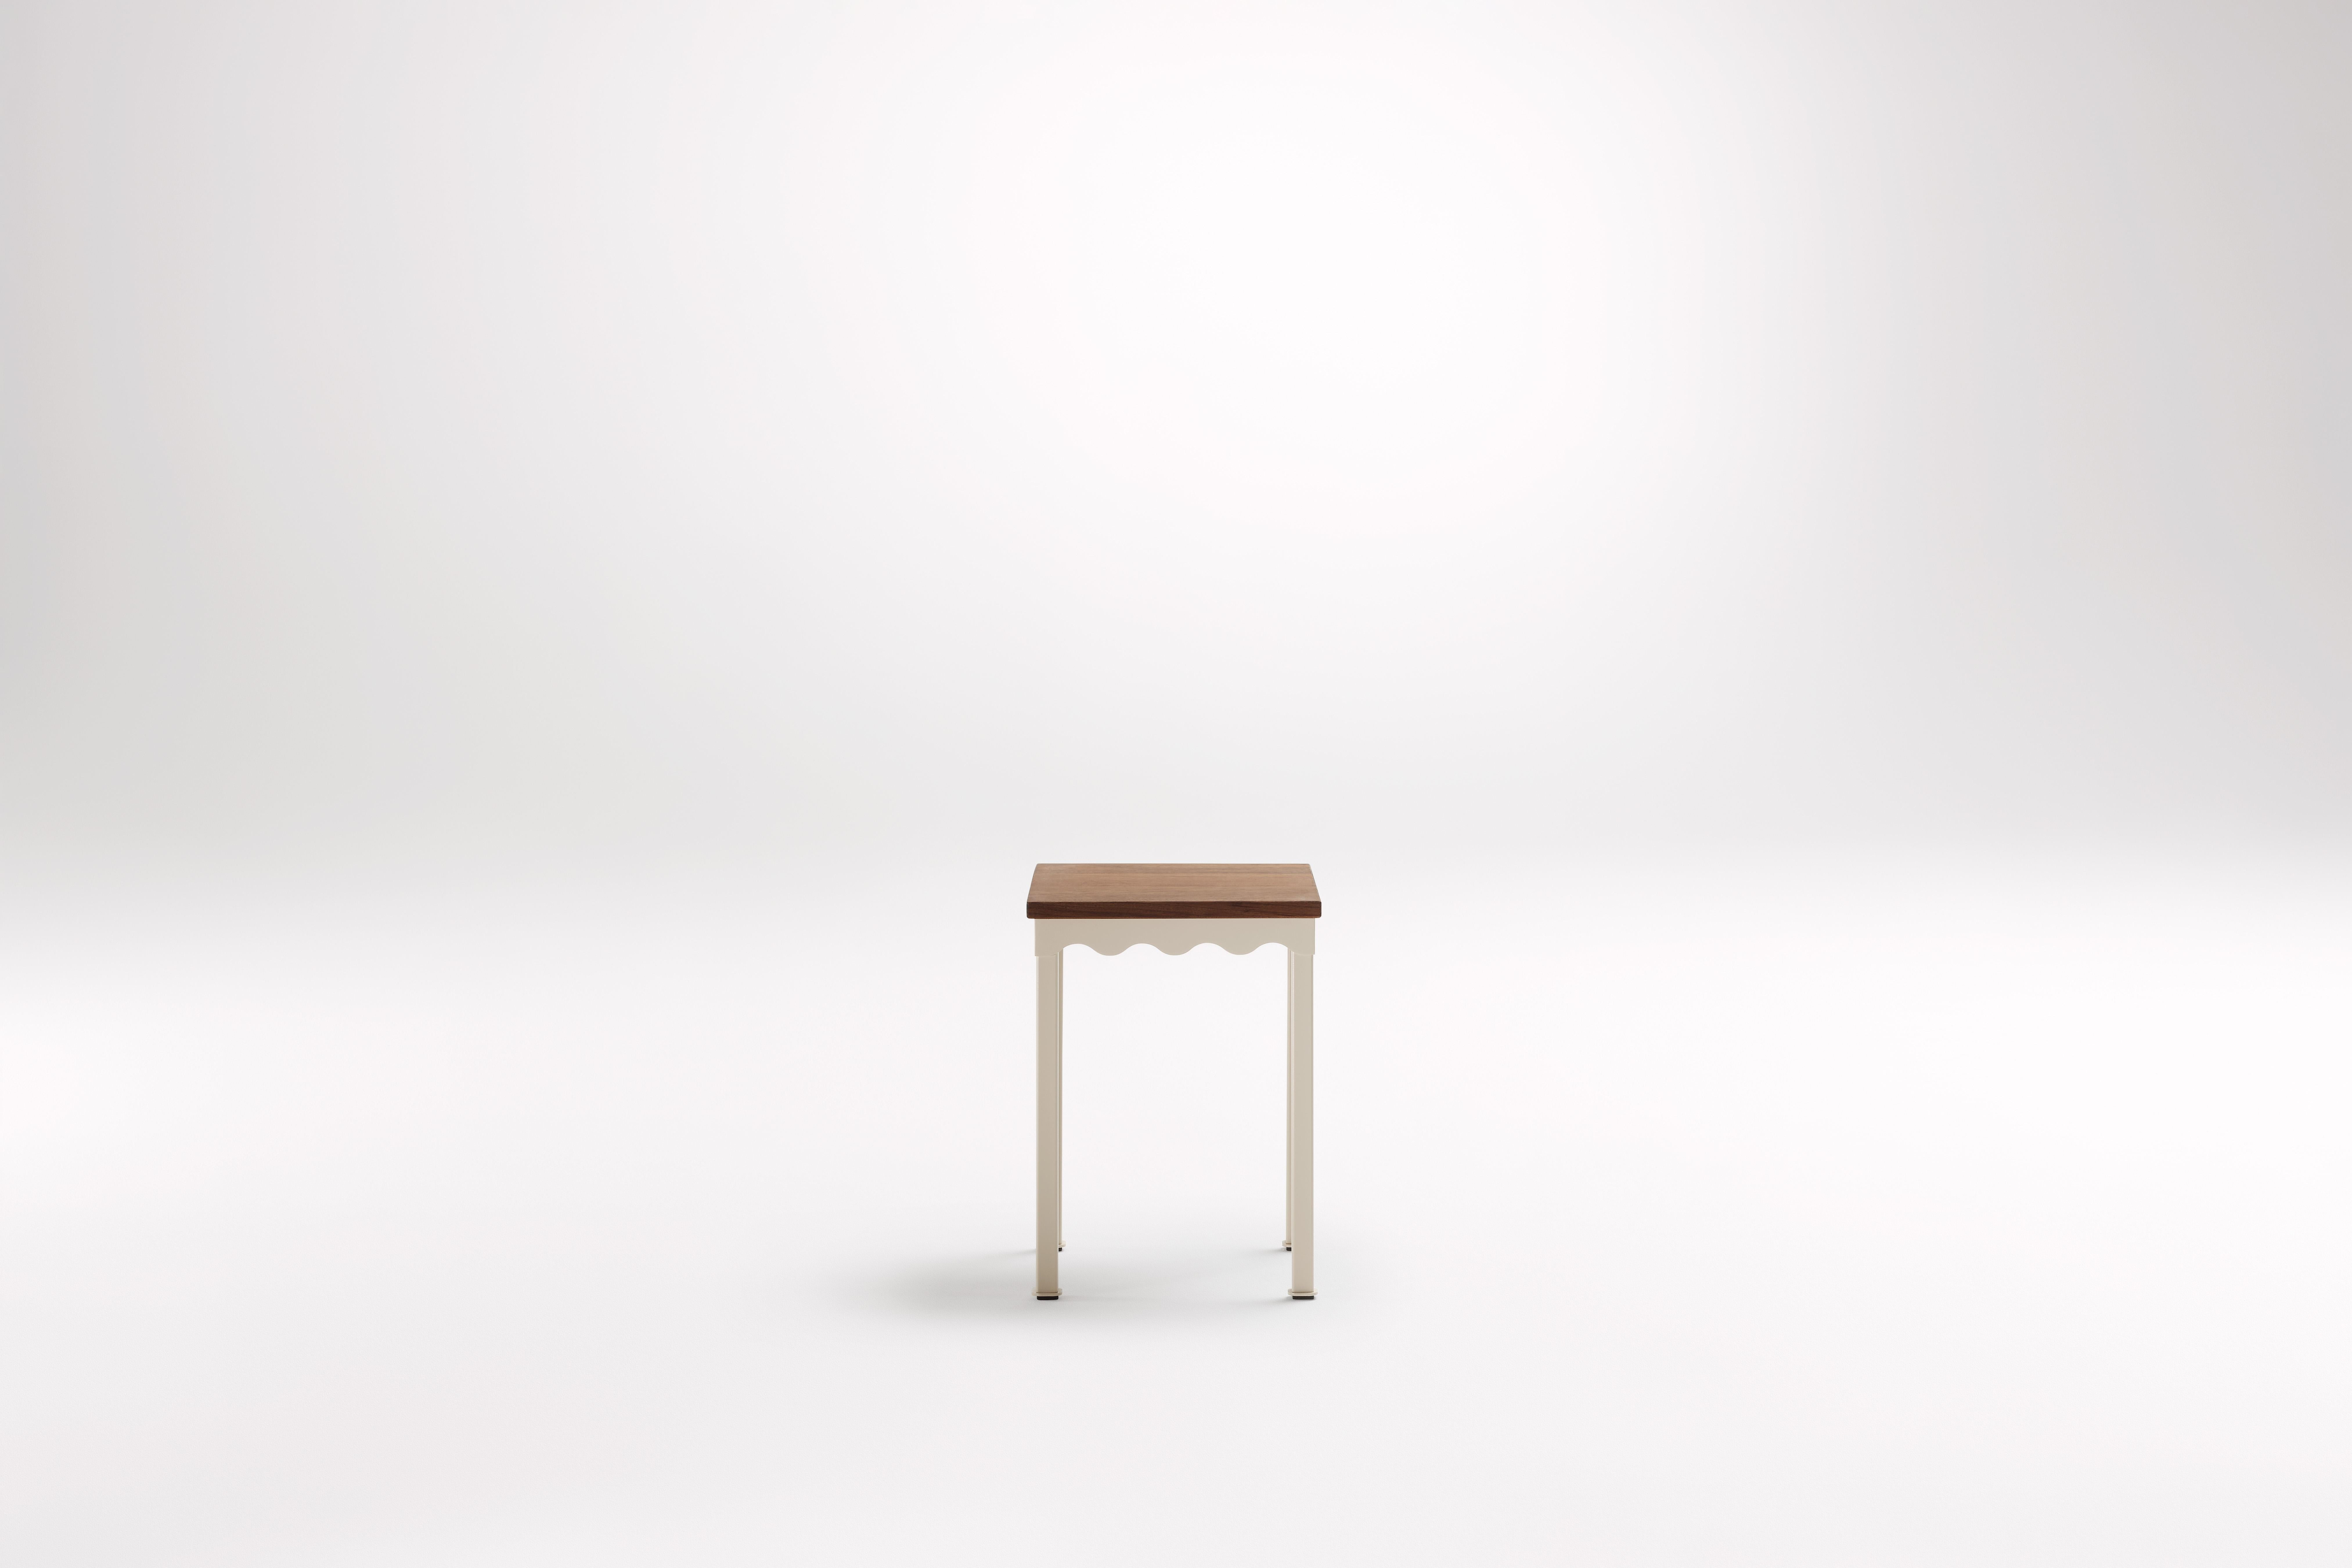 Blackwood Bellini Low Stool by Coco Flip
Dimensions: D 34 x W 34 x H 45 cm
Materials: Timber / Stone tops, Powder-coated steel frame. 
Weight: 5 kg
Timber Tops: Blackwood .
Frame Finishes: Textura Paperbark.

Coco Flip is a Melbourne based furniture